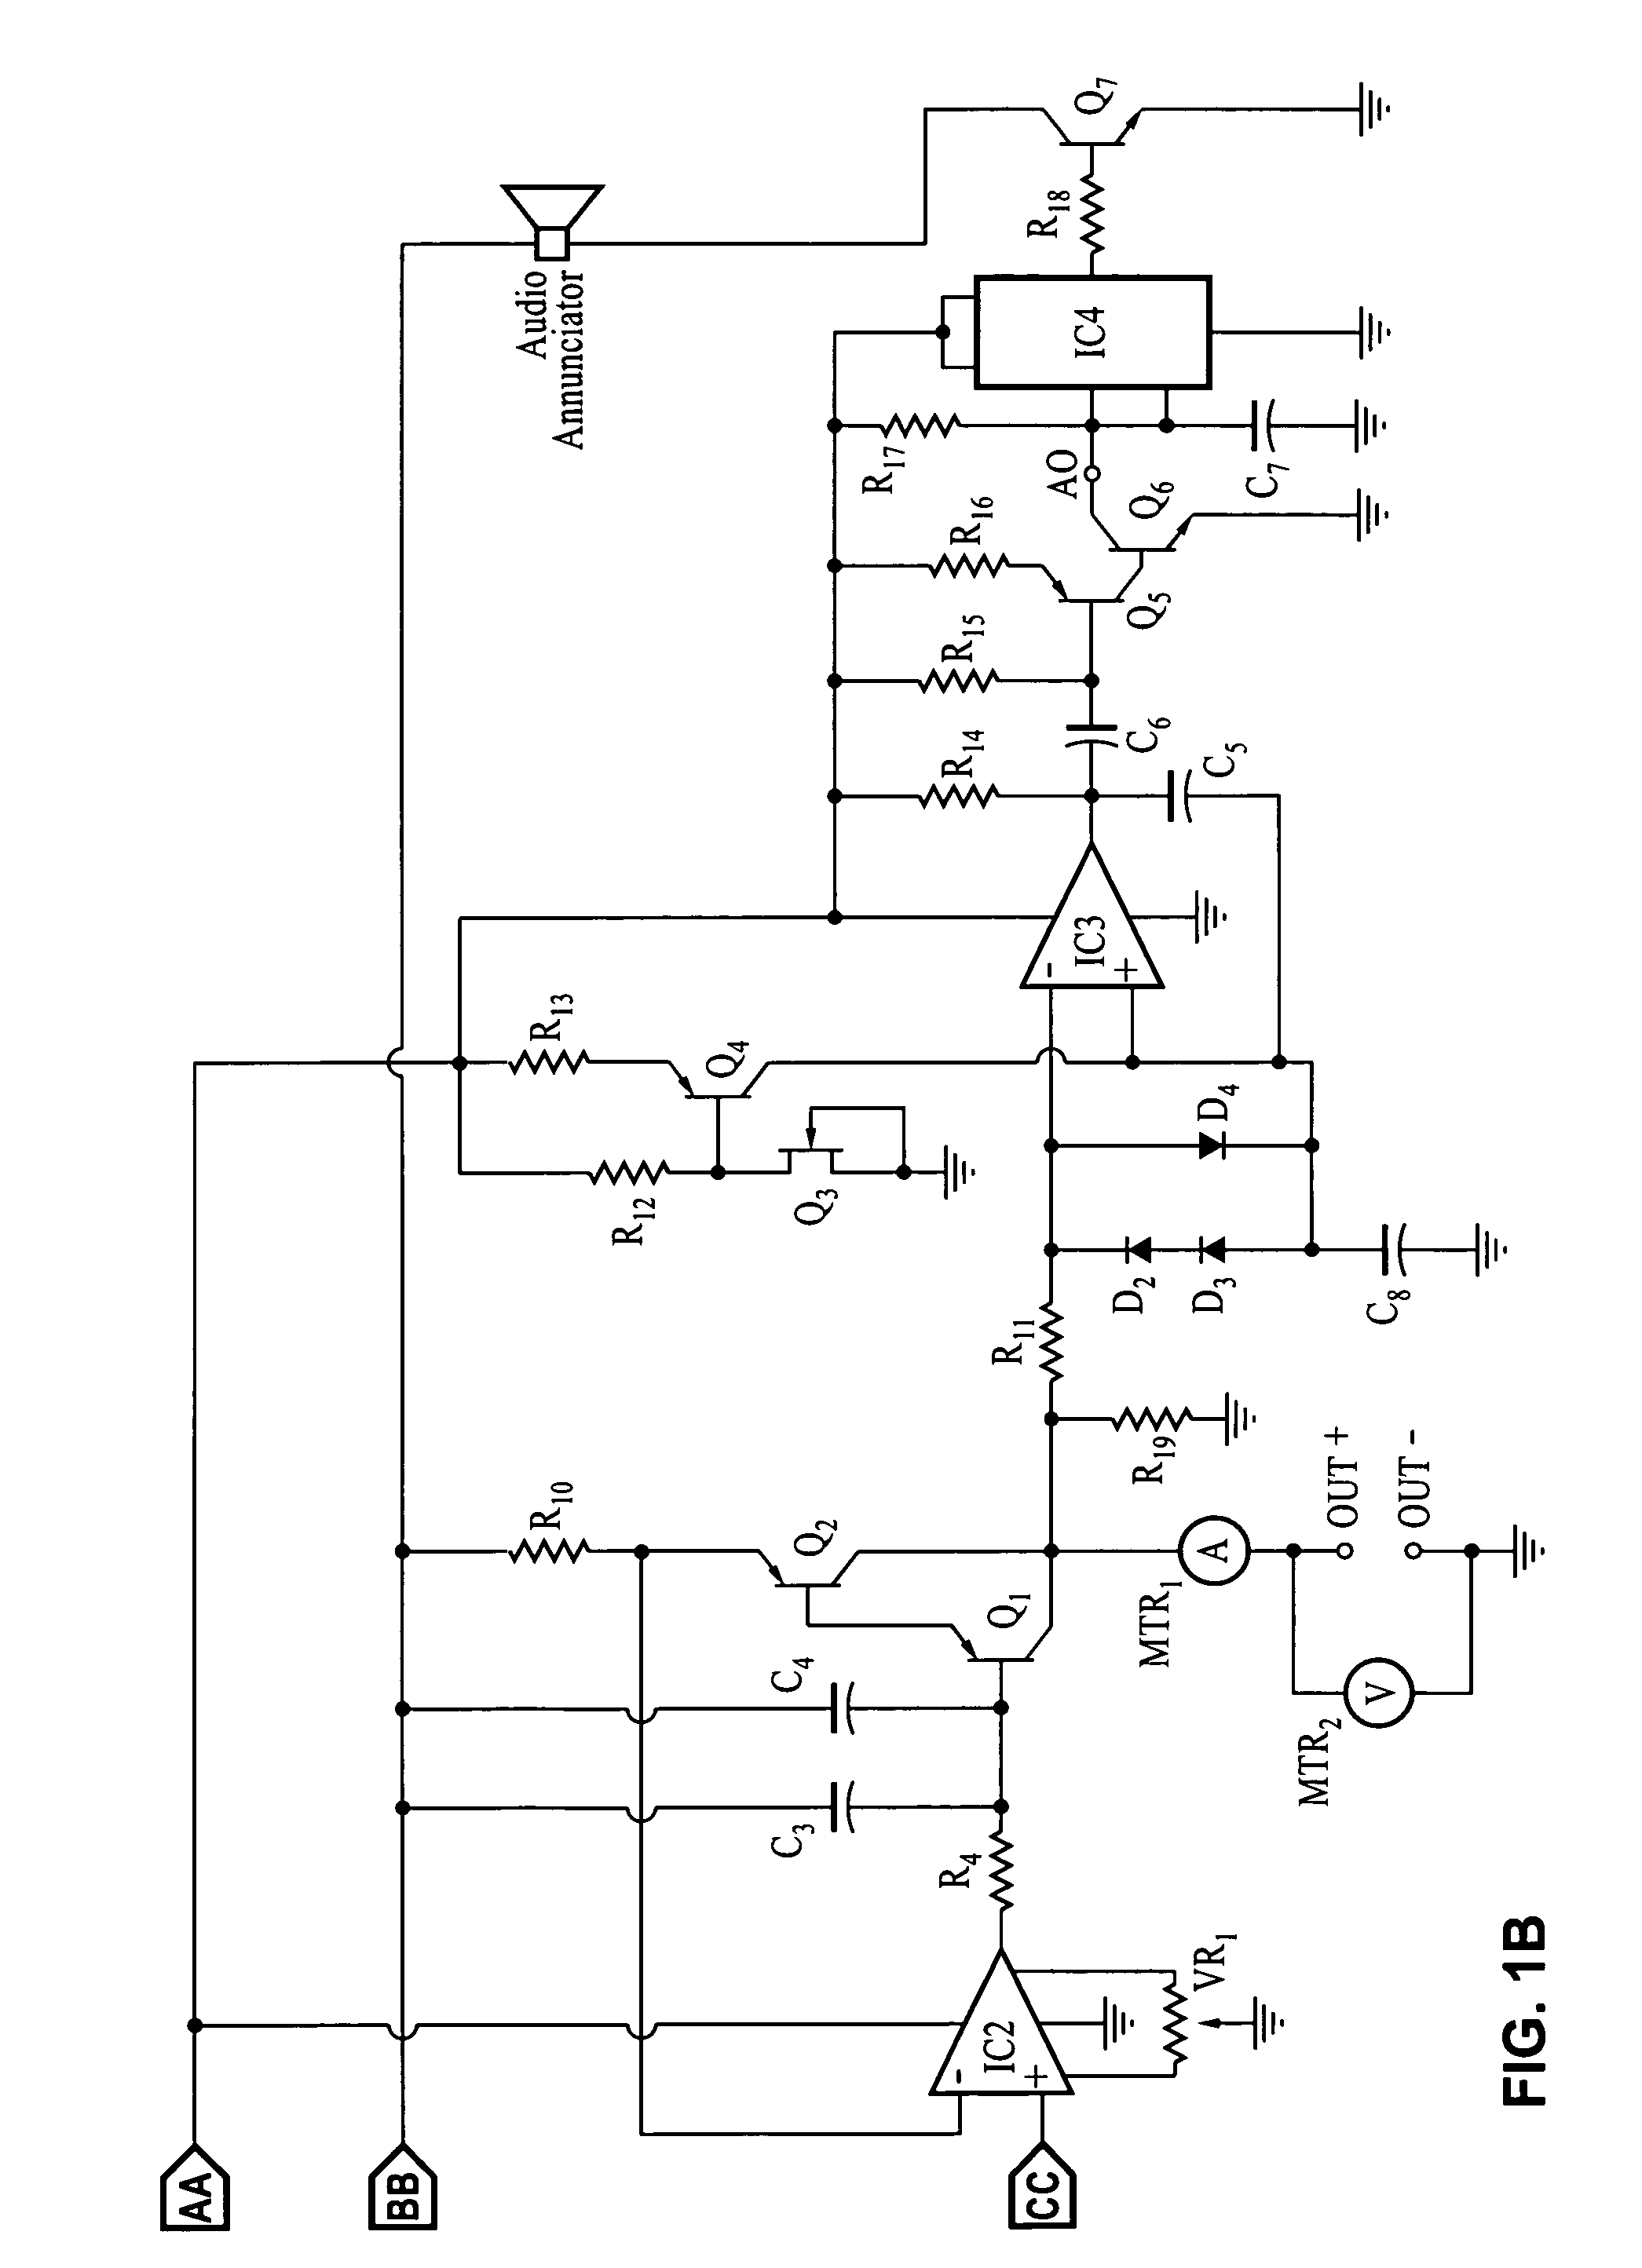 Electrical short tracing apparatus and method